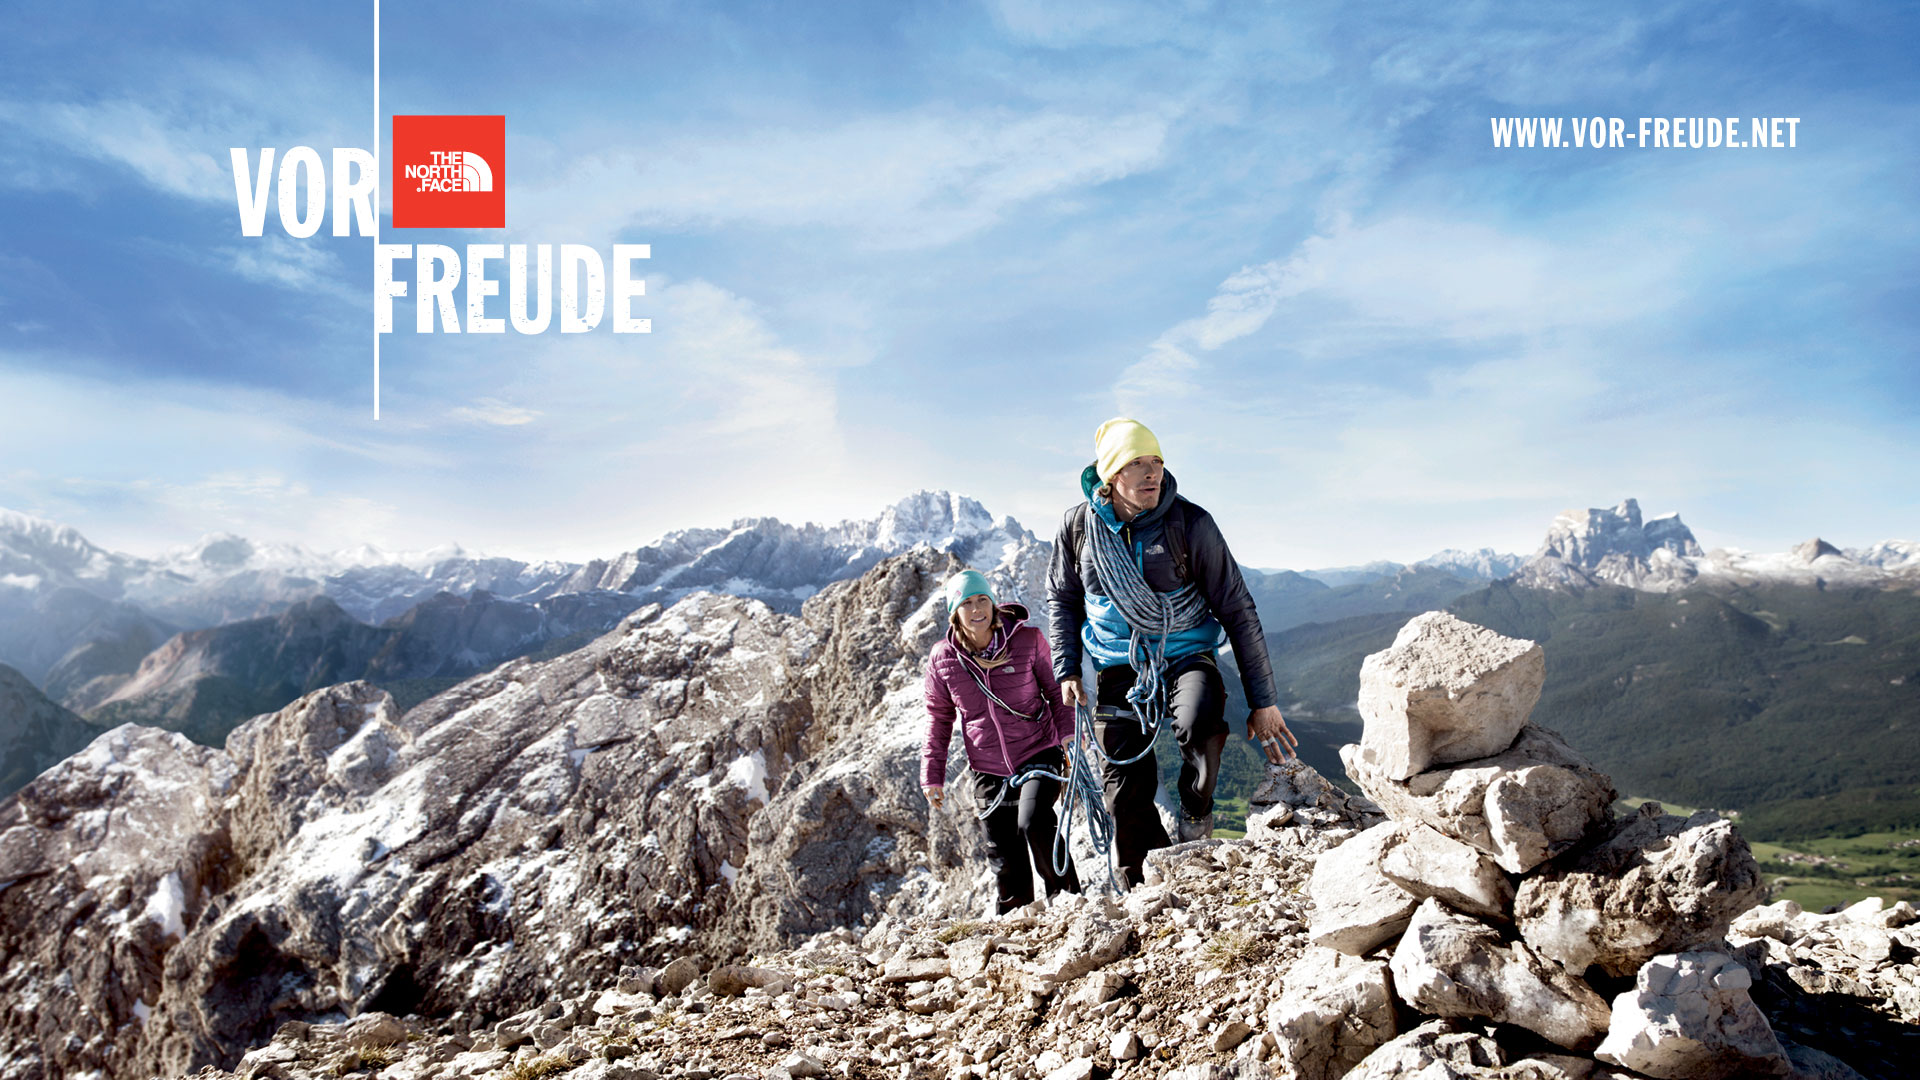 The North Face Wallpaper - The North Face - 1920x1080 Wallpaper 